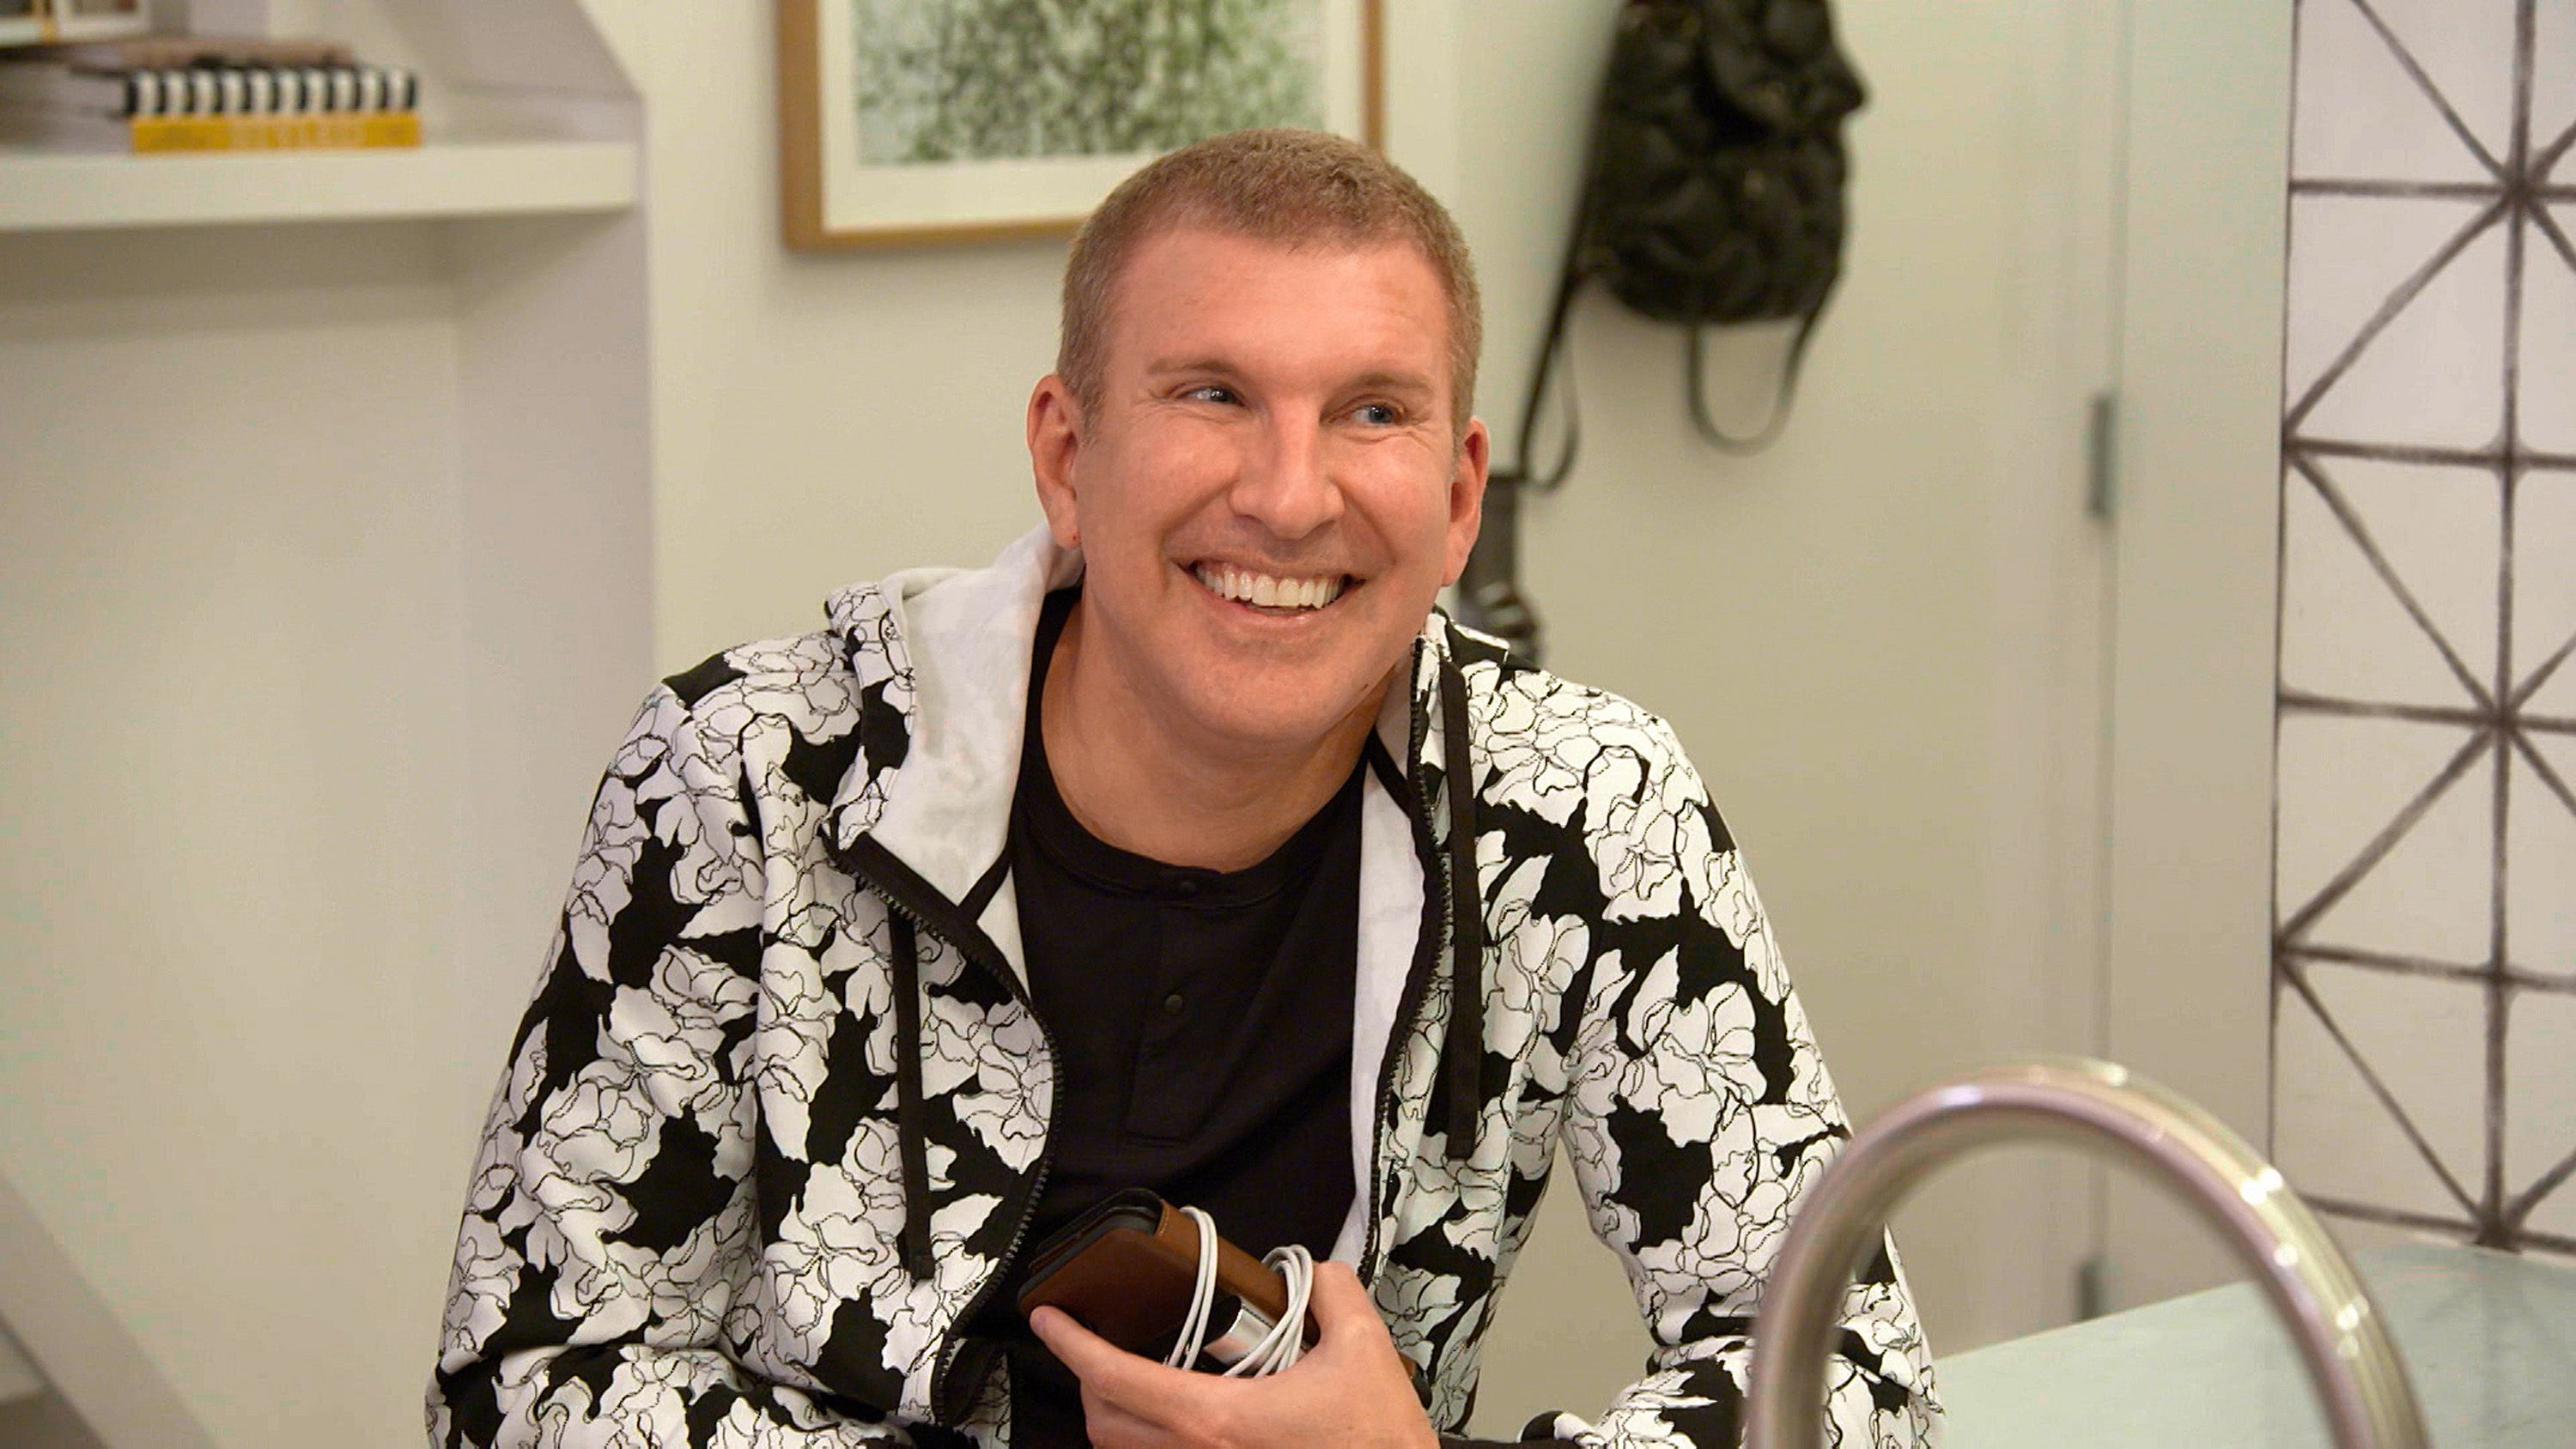 Todd Chrisley smiles on "Chrisley Knows Best" Episode 807.   | Source: Getty Images